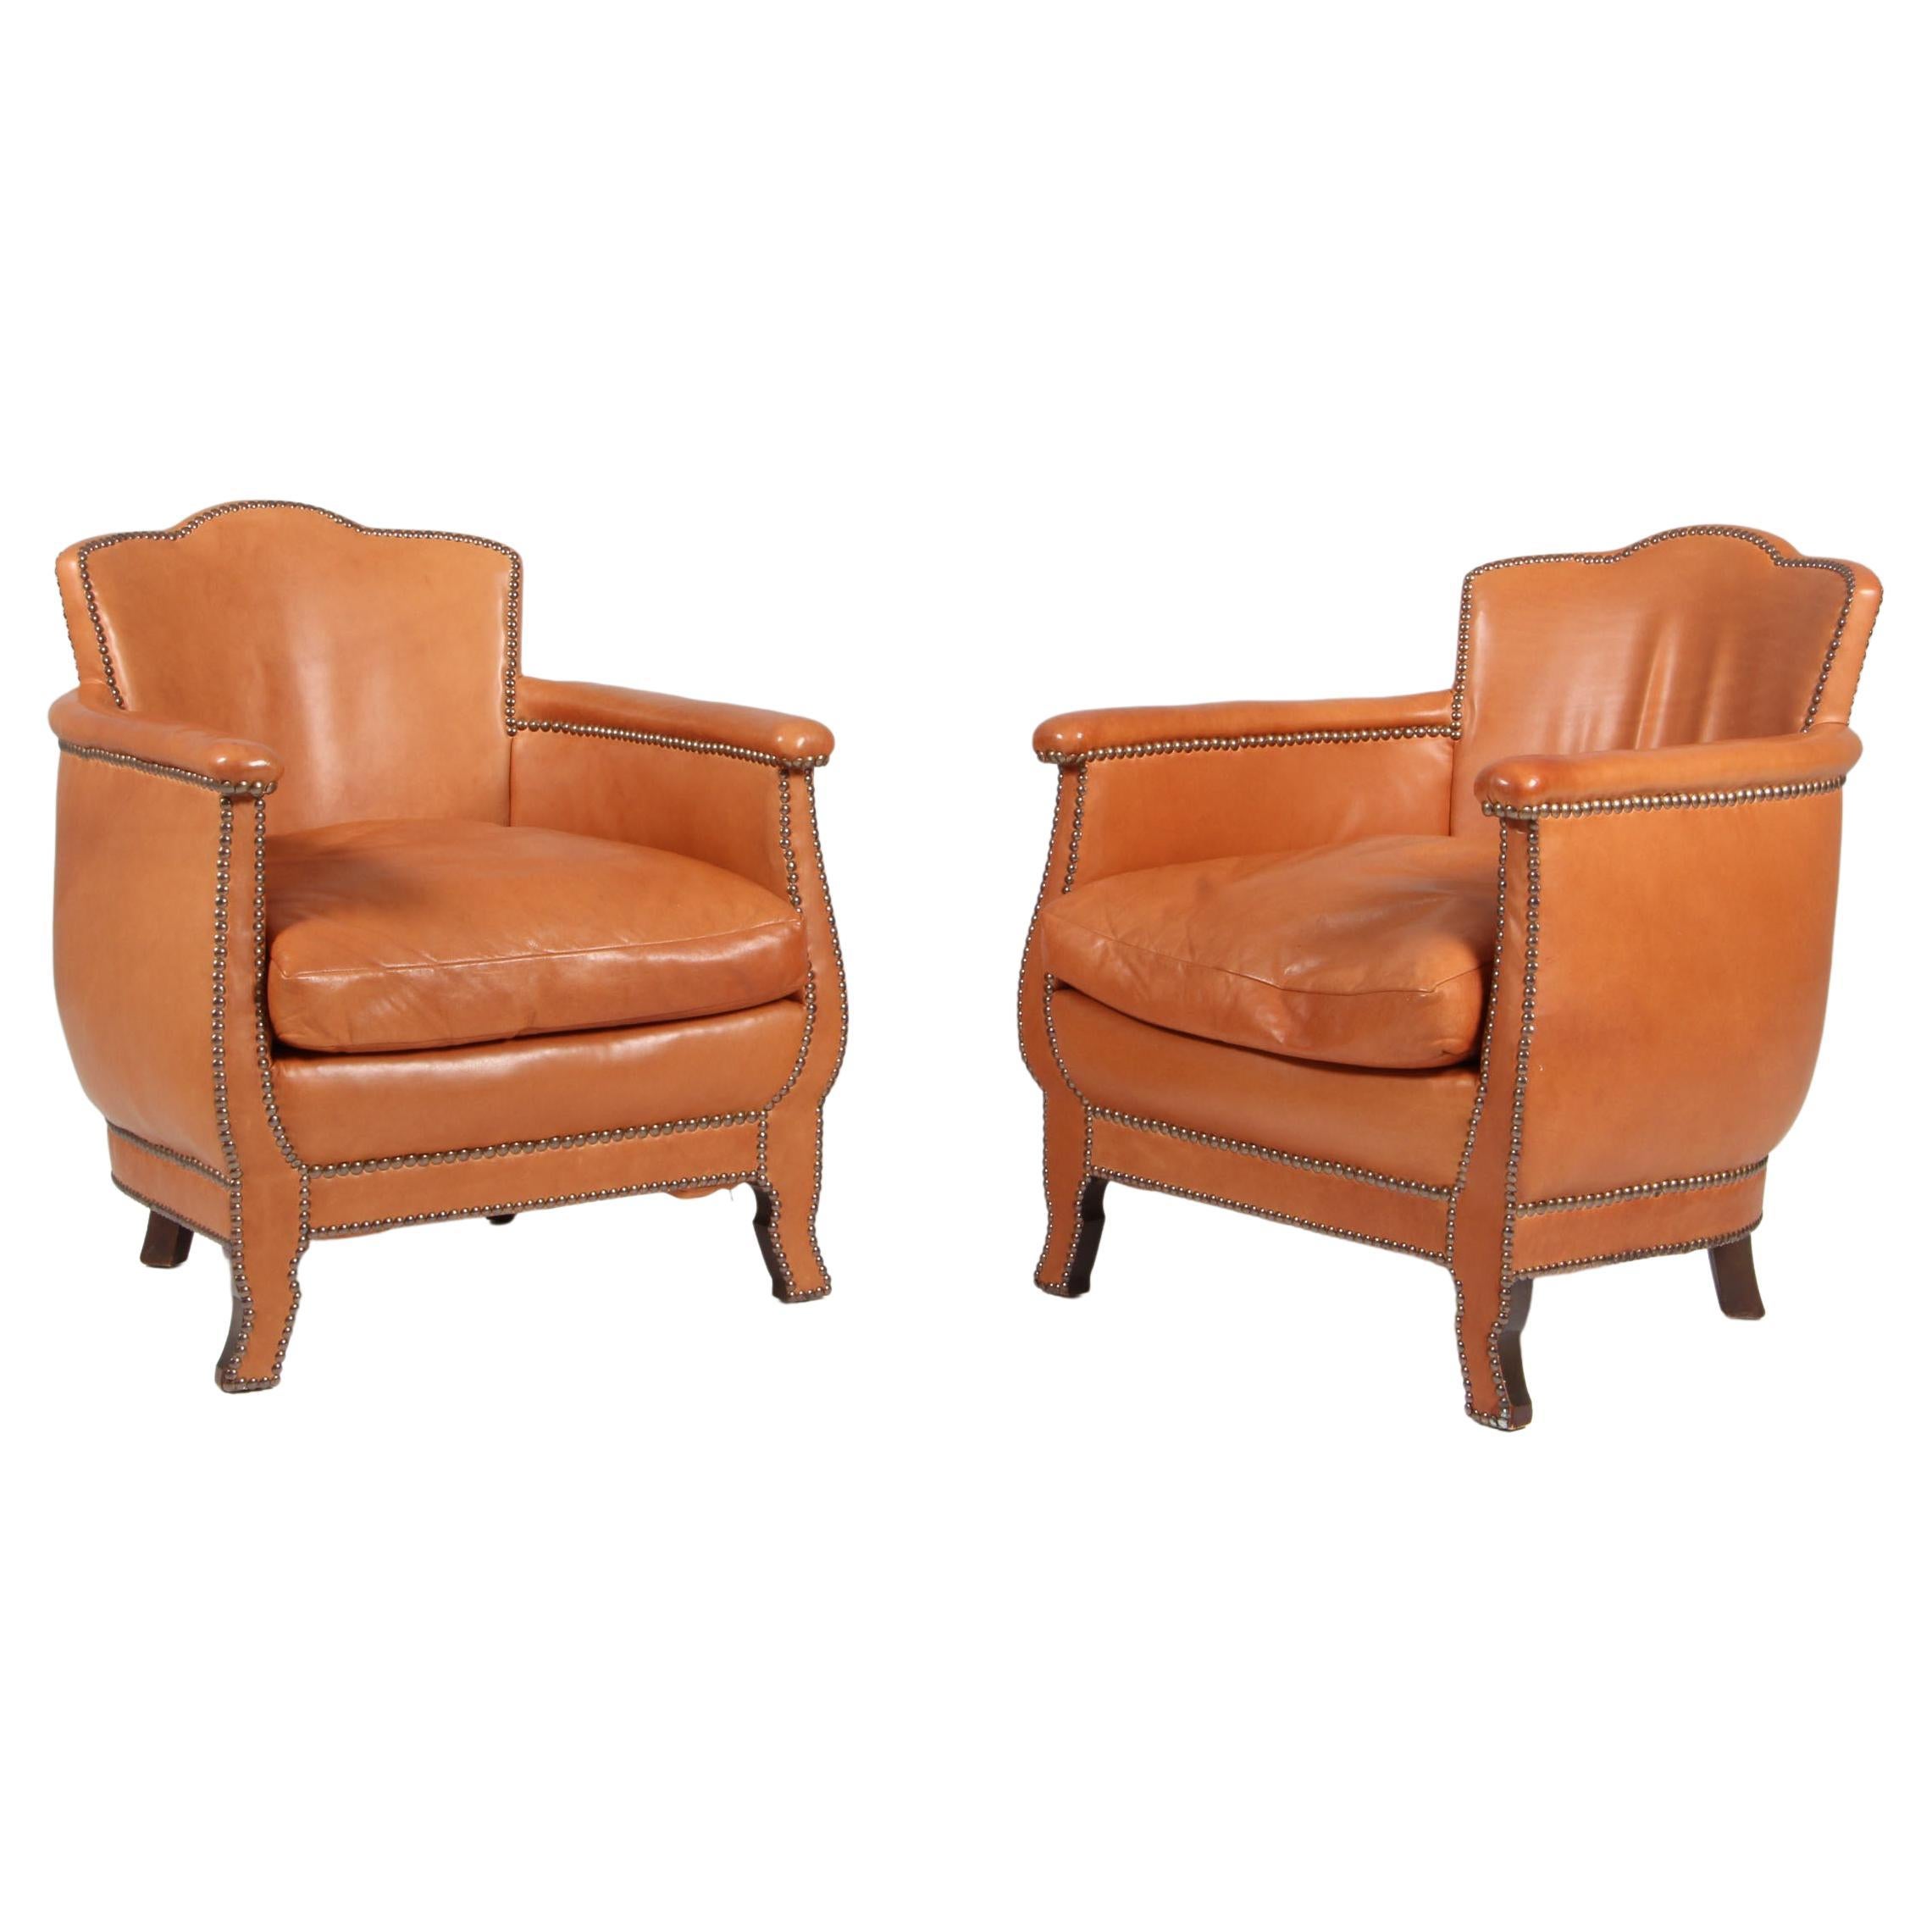 Otto Schulz, Pair of Lounge Chairs